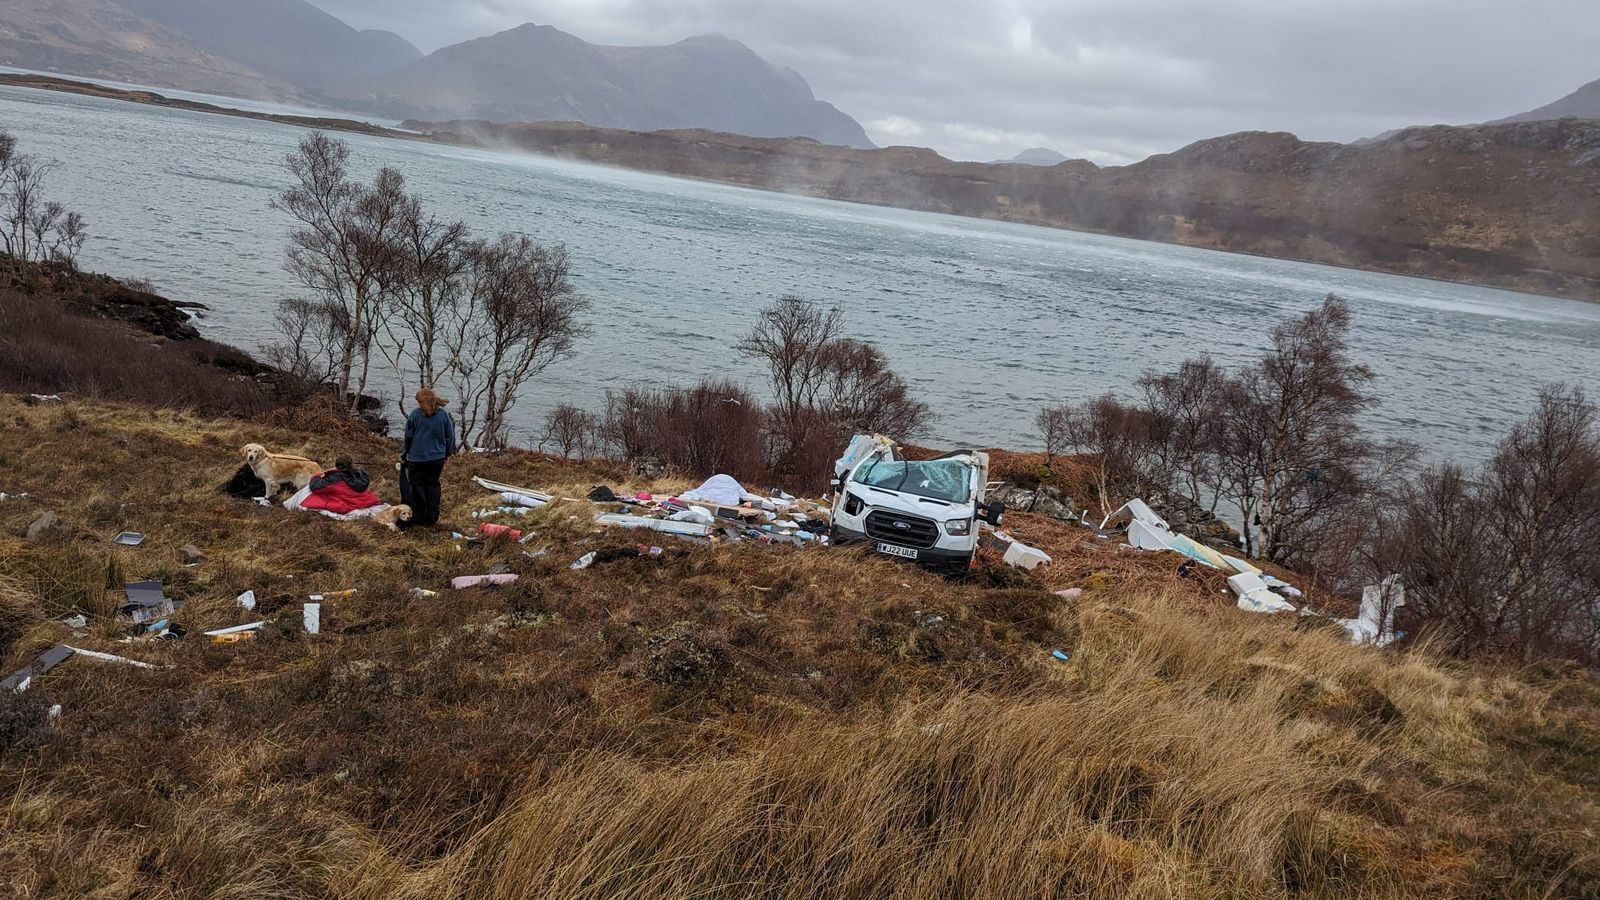 The campervan was destroyed after being ravaged by Storm Kathleen.